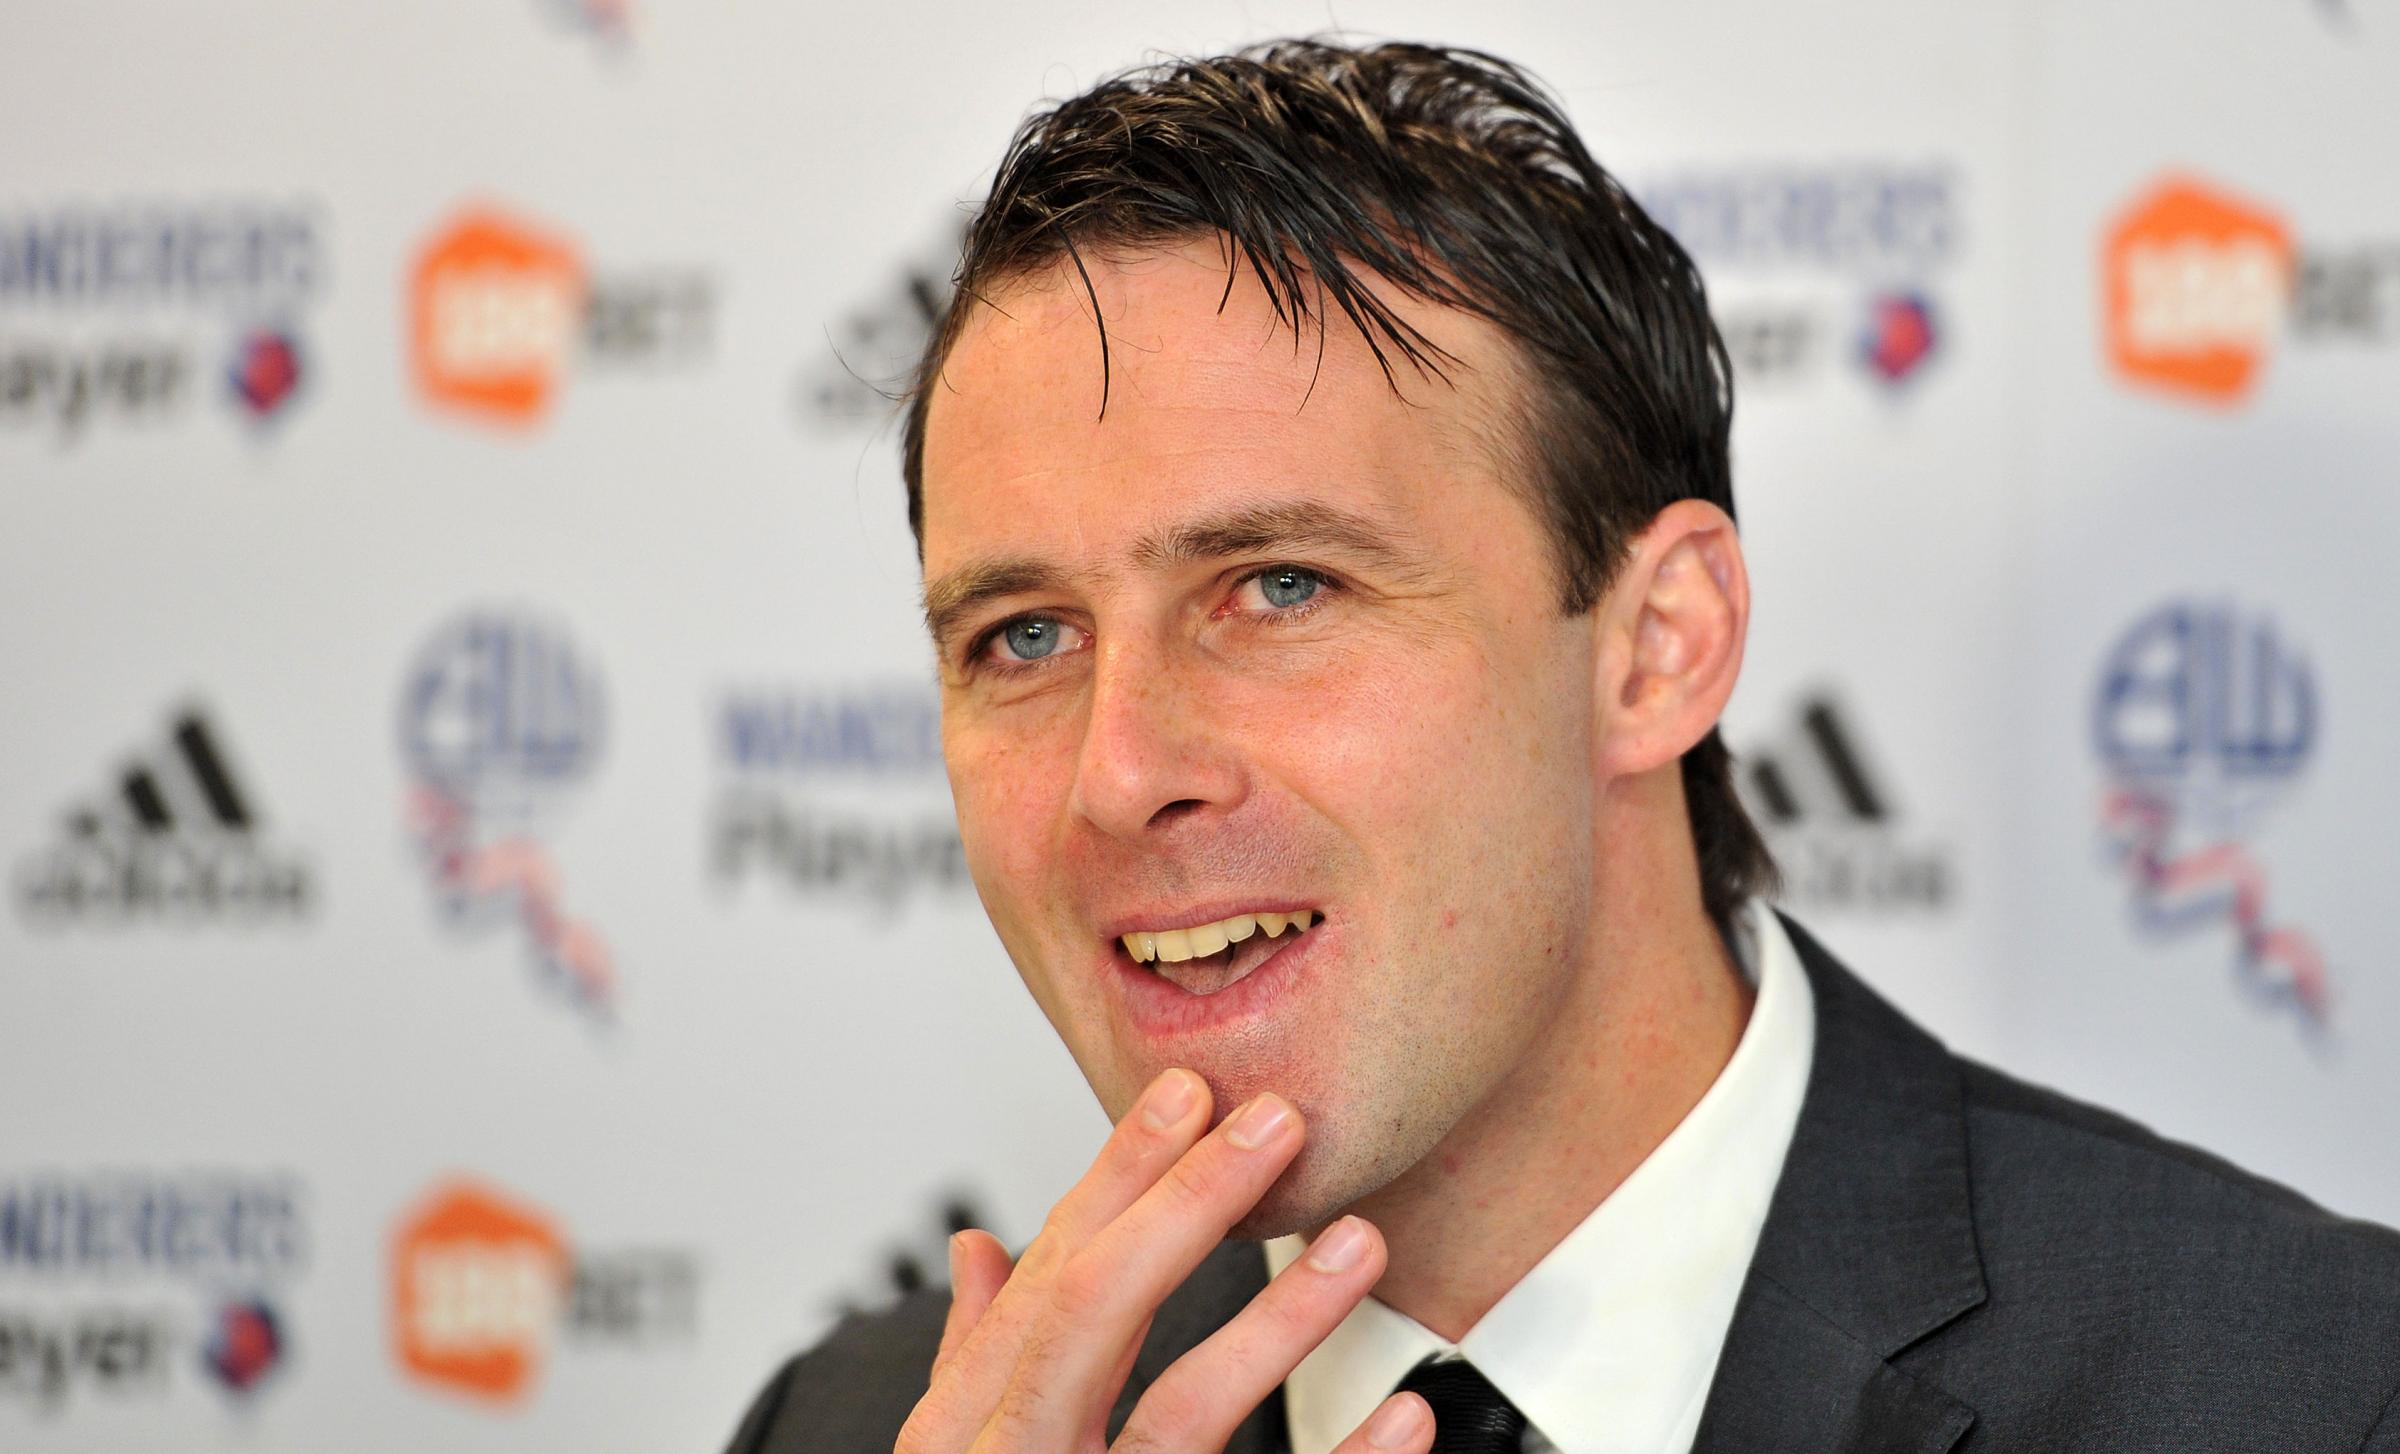 Dougie Freedman stays at Crystal Palace rather than joining Newcastle